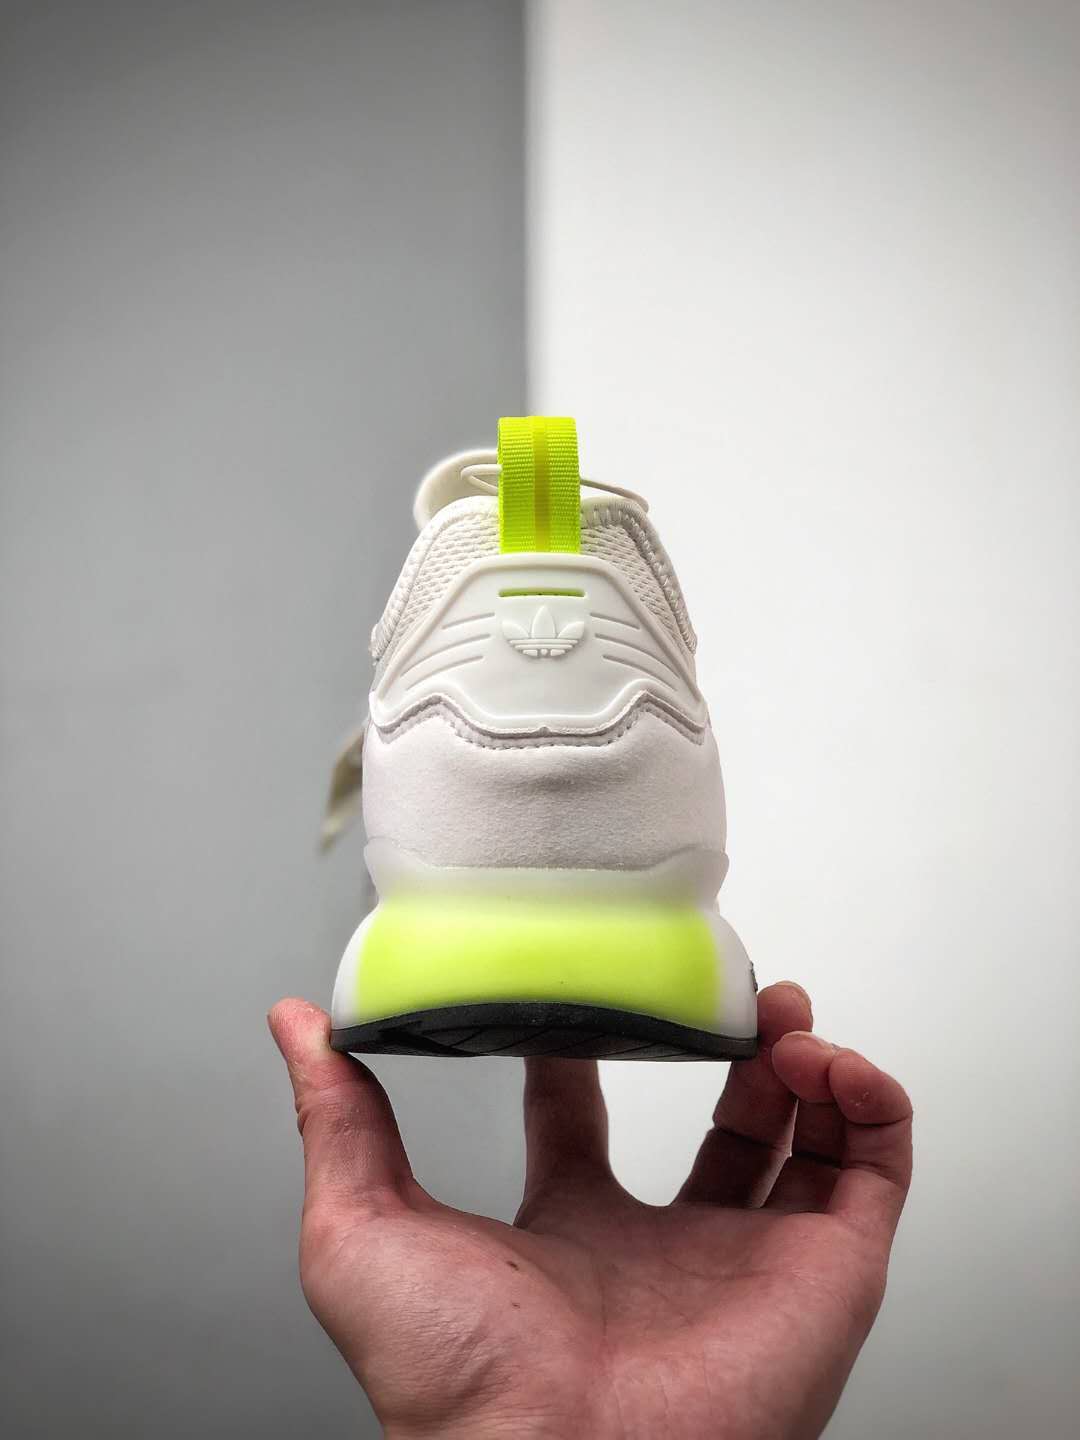 Adidas ZX 2K Boost 'White Solar Yellow' FW0480 - Latest Release from Adidas